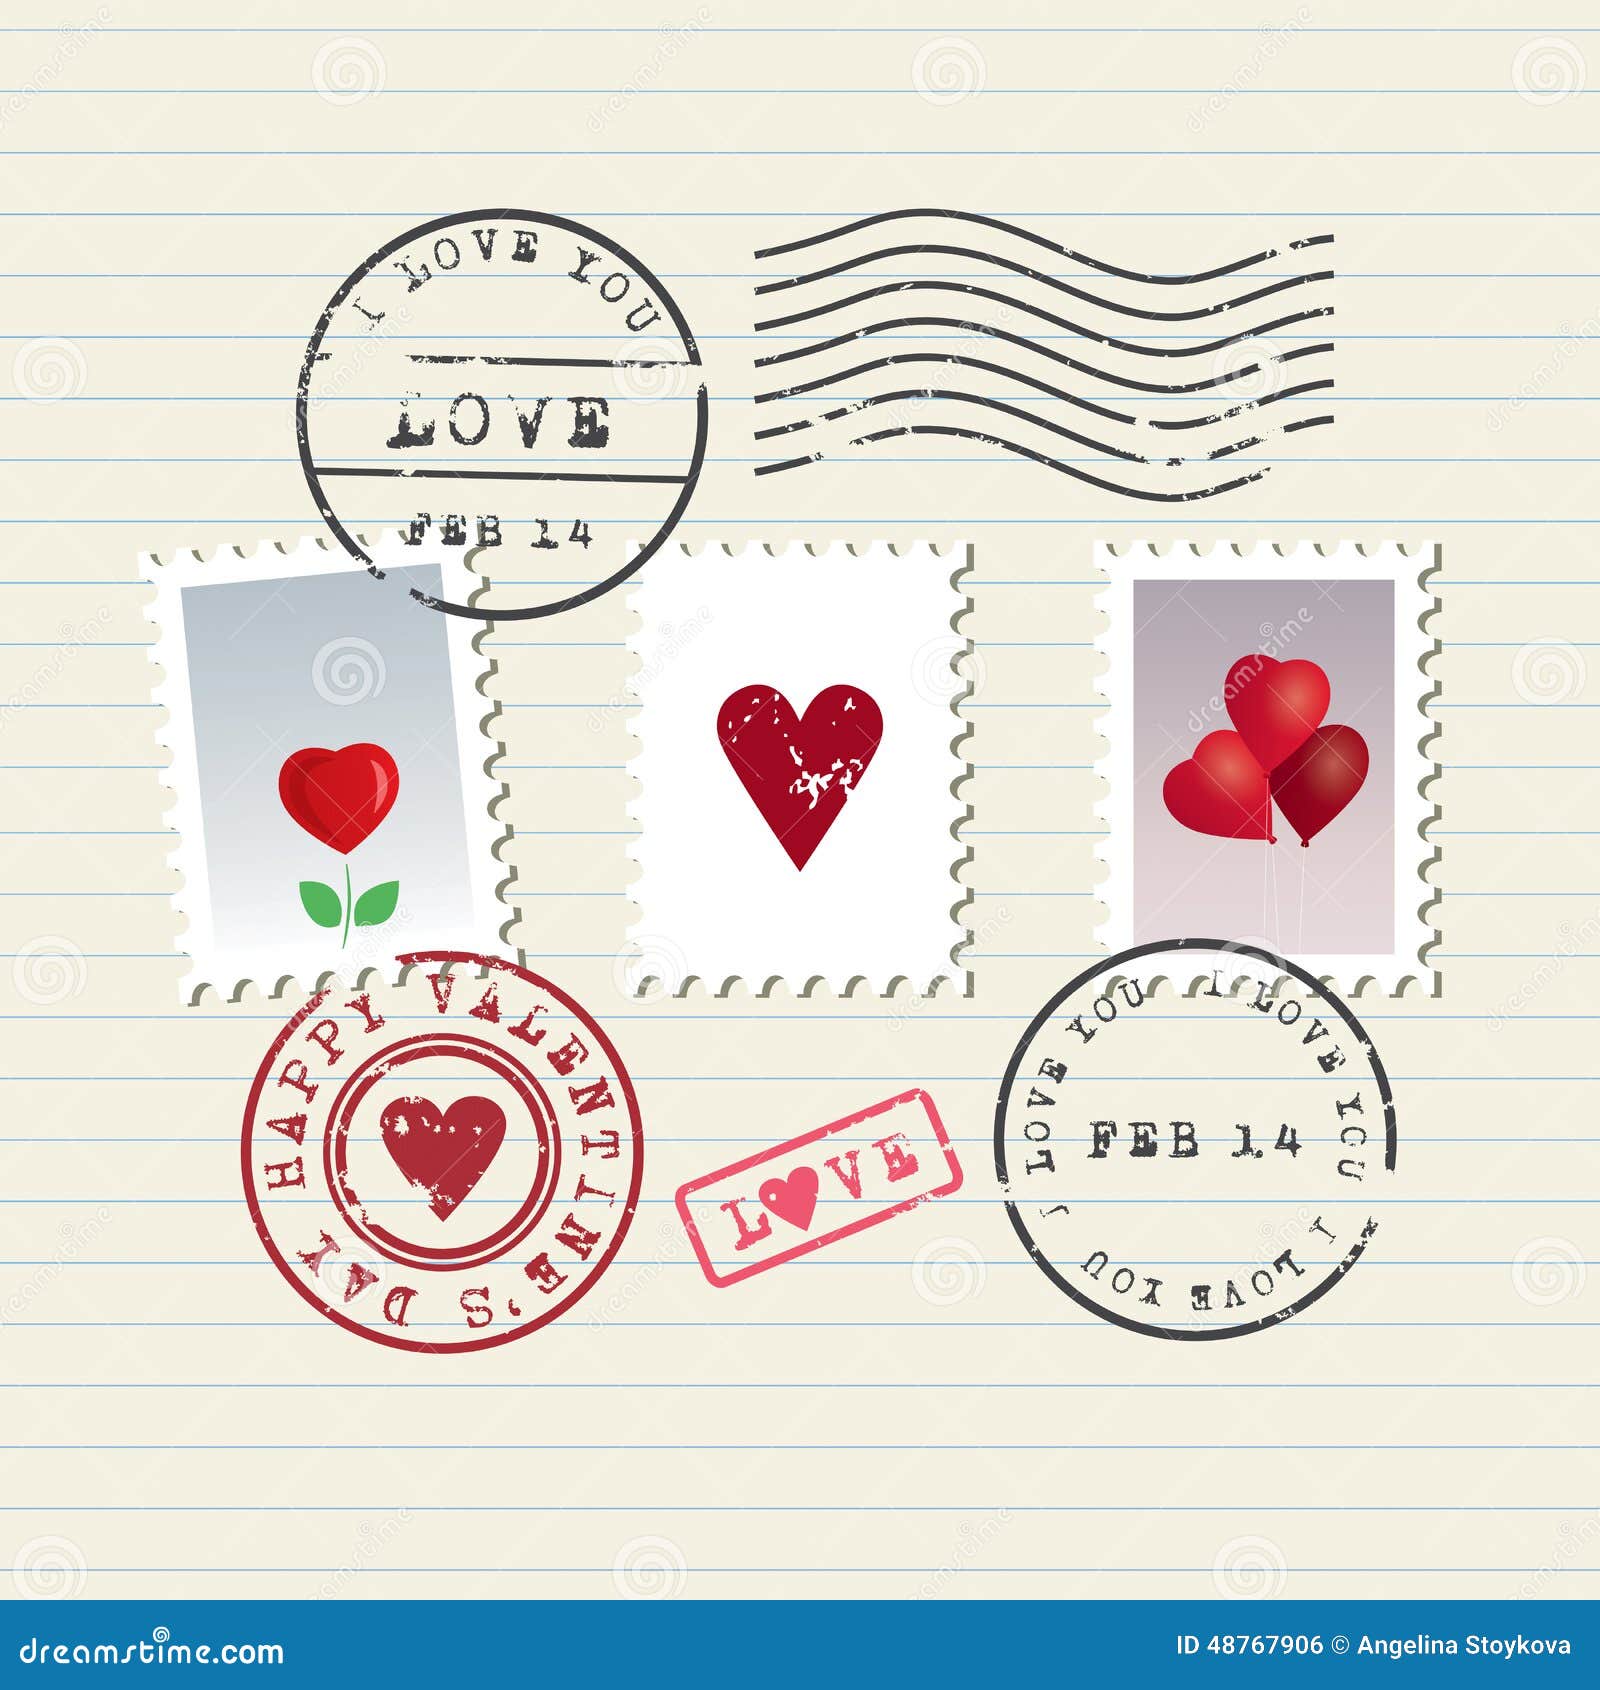 Love Stamps Love Letters Stock Vector (Royalty Free) 70679086